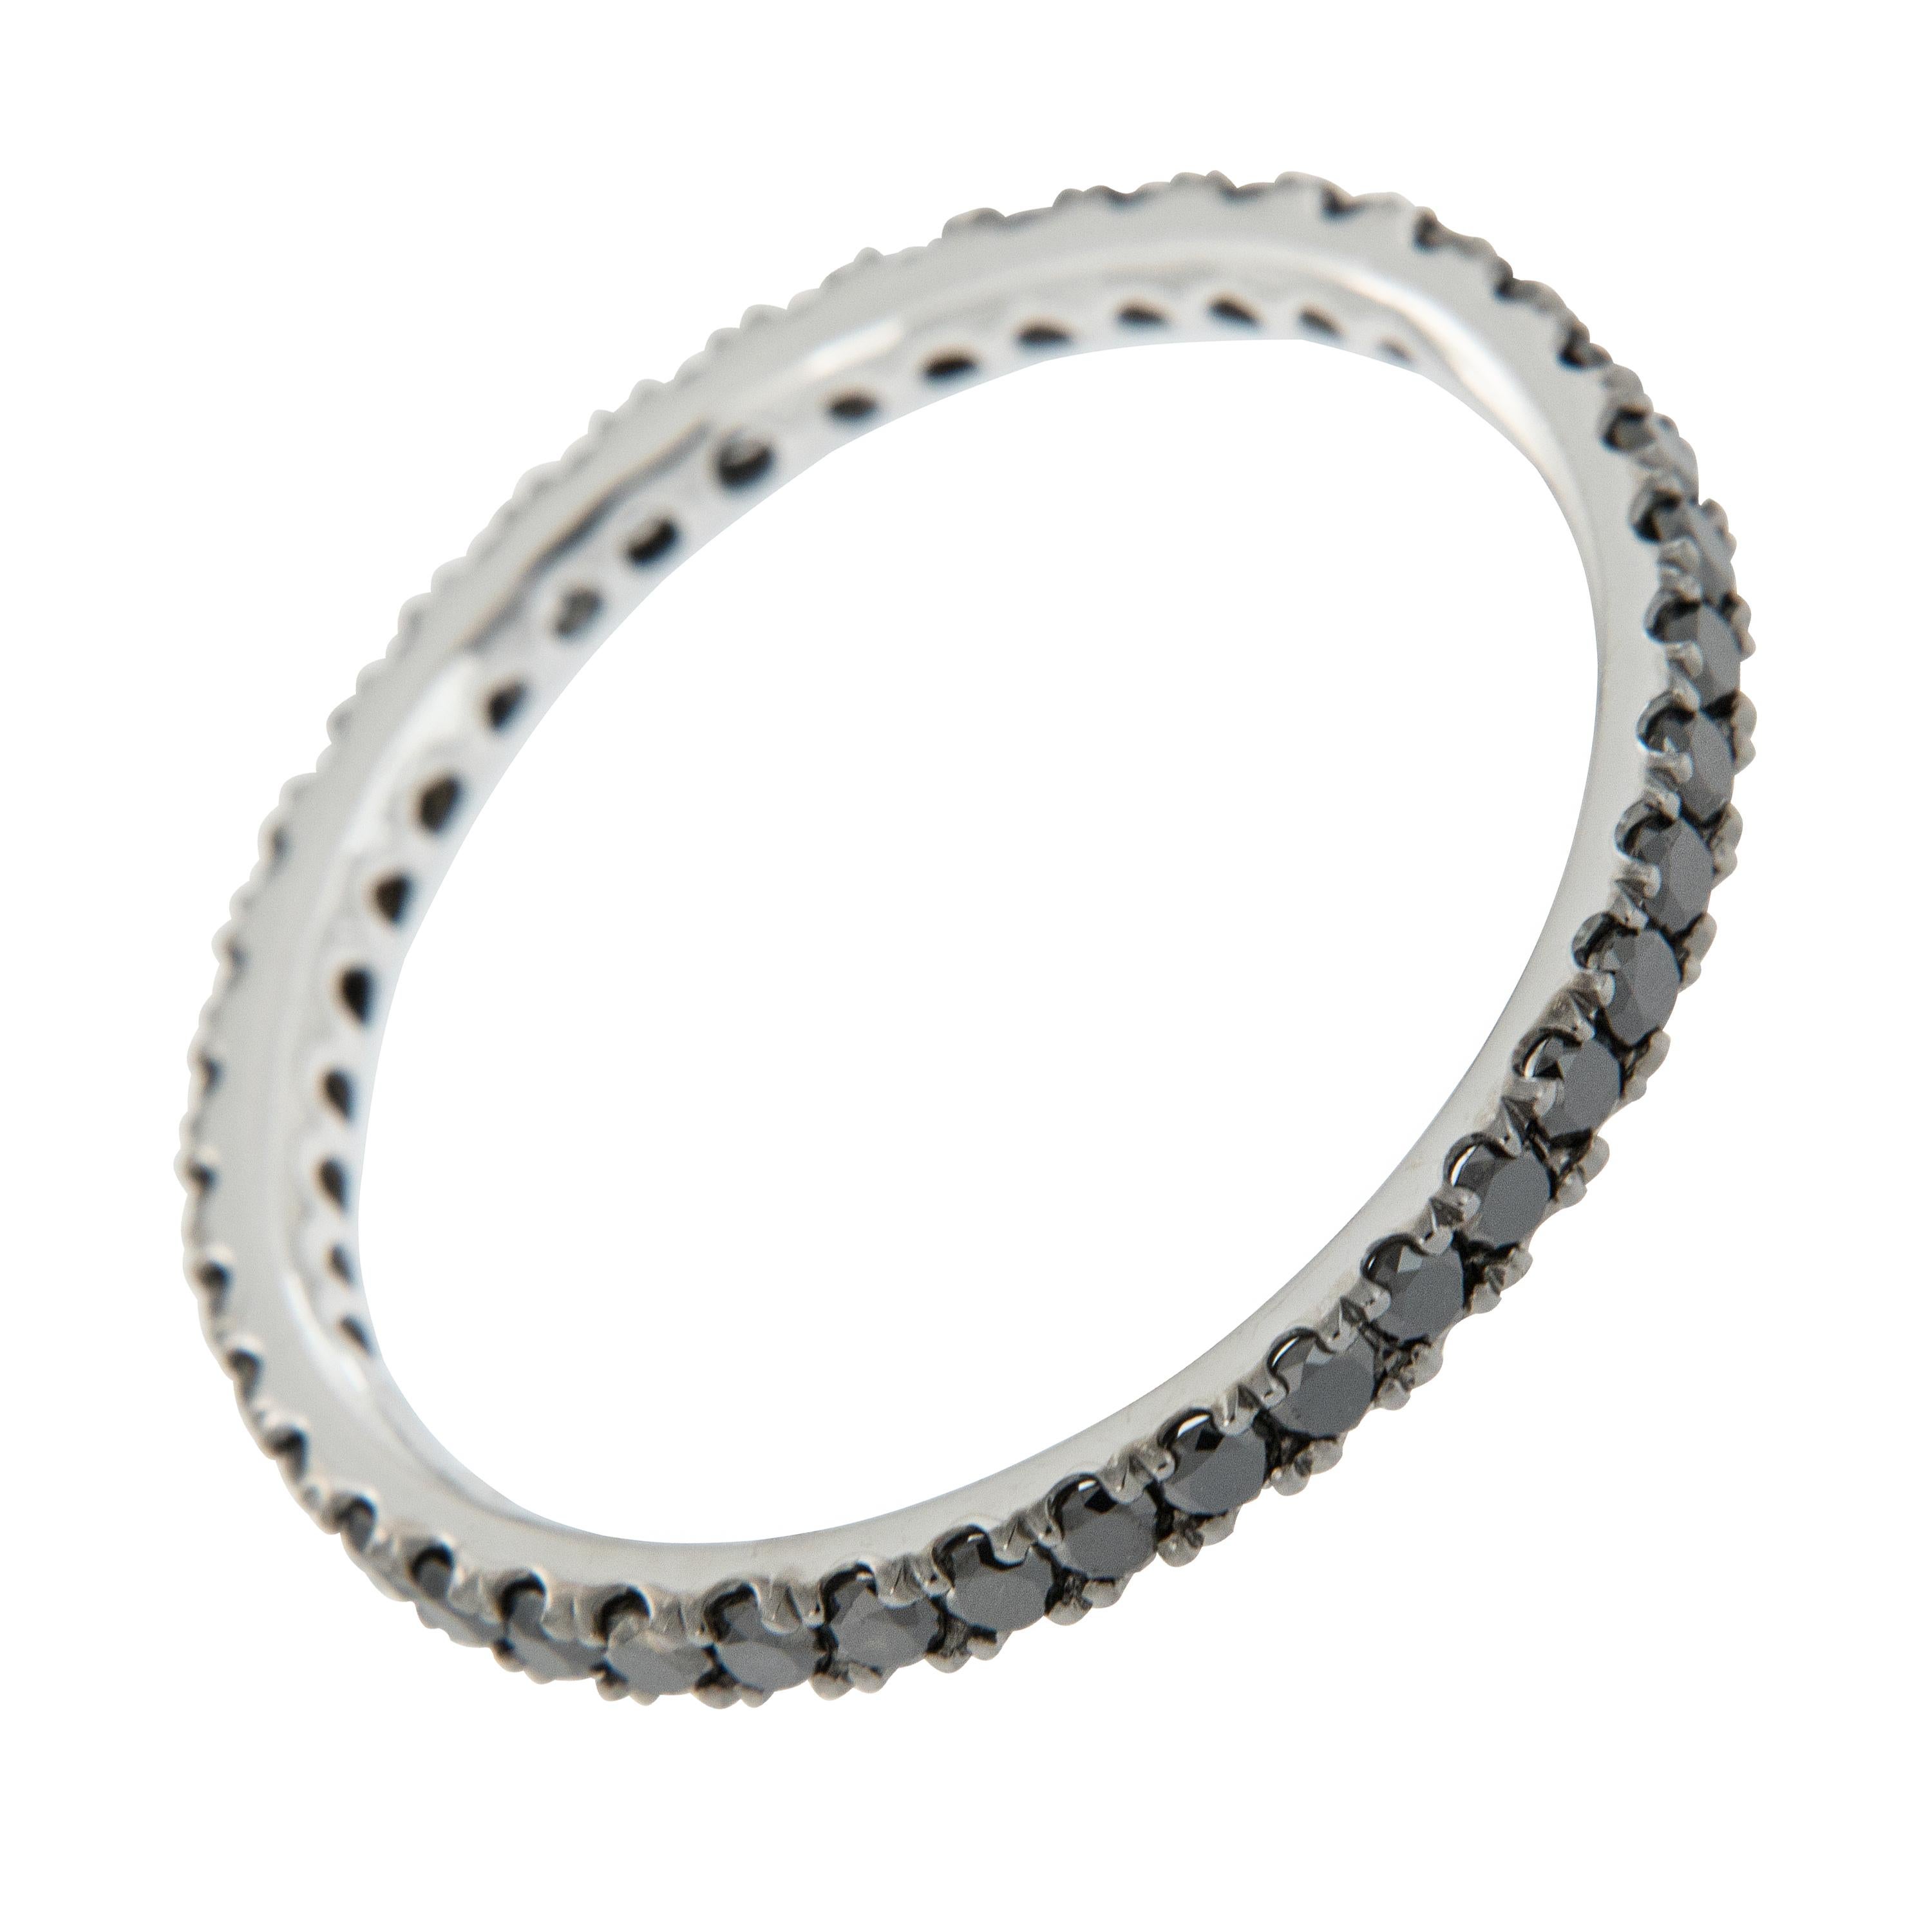 Tuxedo black diamonds accent this band all the way around so it always faces up beautifully! It can be worn alone or also looks fantastic stacked! Black goes with everything which makes this ring versatile. 14 karat white gold with 40 black diamonds